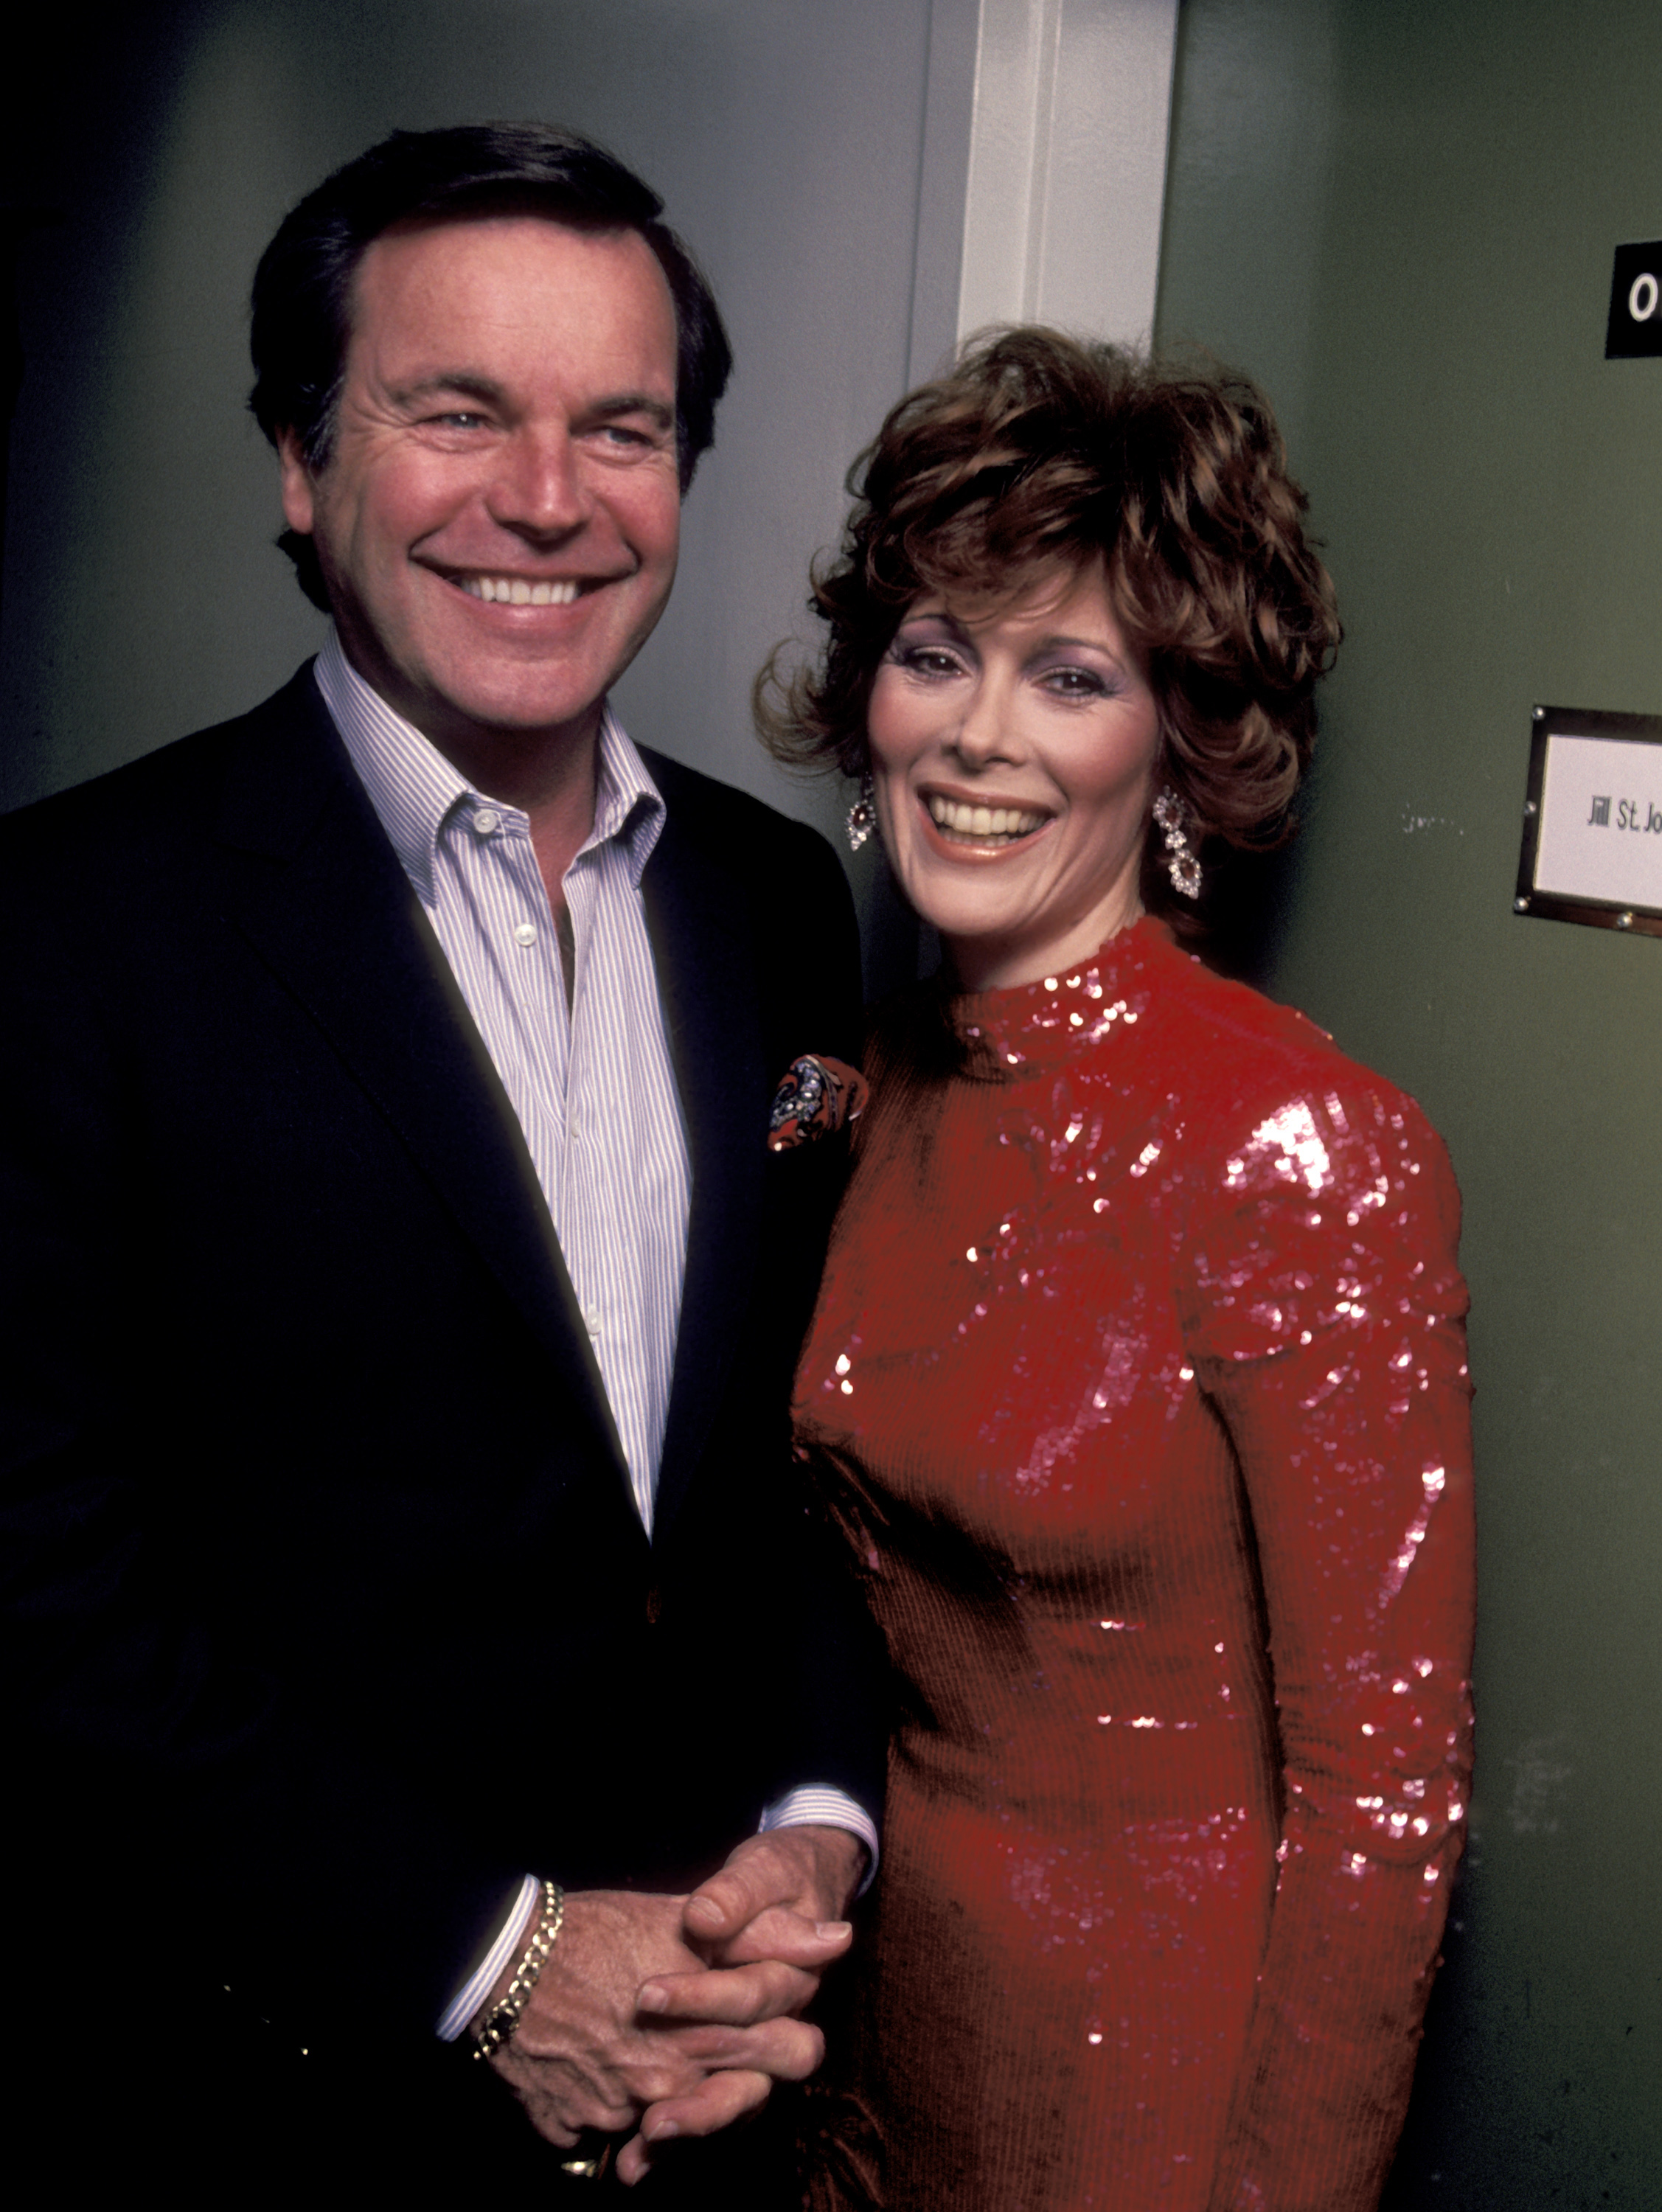 Robert Wagner and Jill St. John during Taping of Bob Hope Special "The Road to Hollywood" at NBC Television Studios on February 20, 1983 in Burbank, California | Source: Getty Images